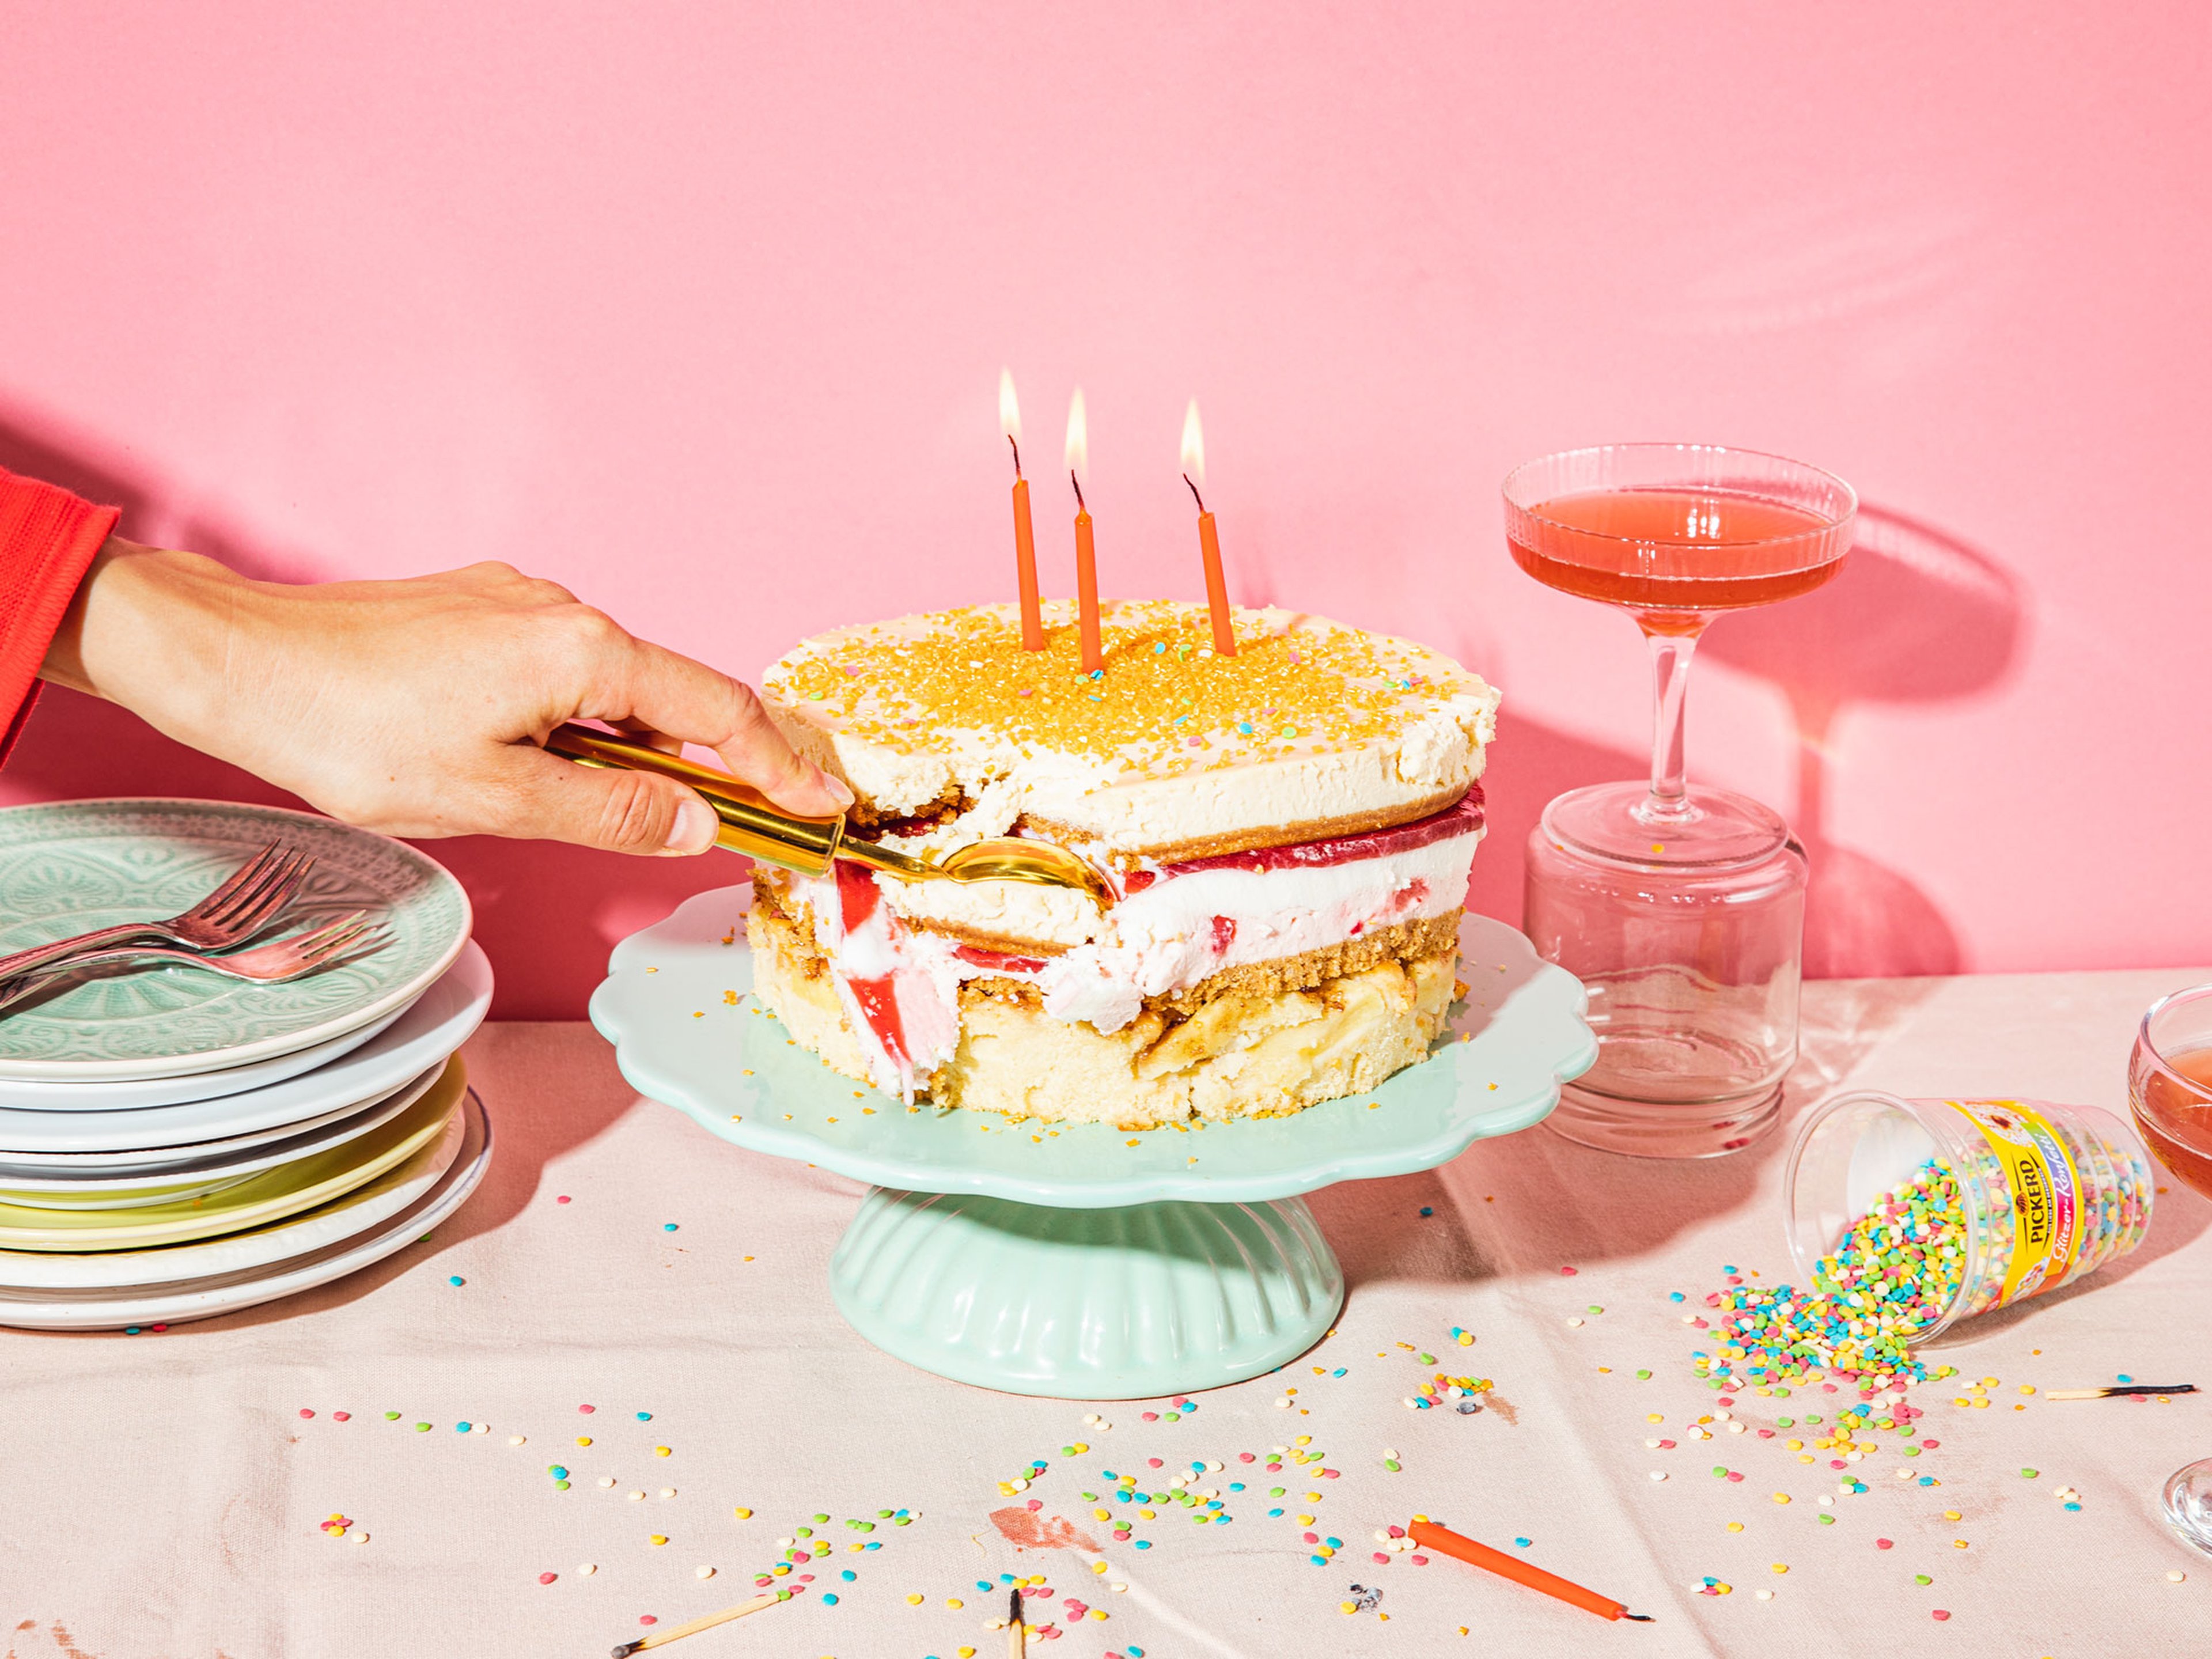 22 of Our Most Spectacular Birthday Cake Recipes